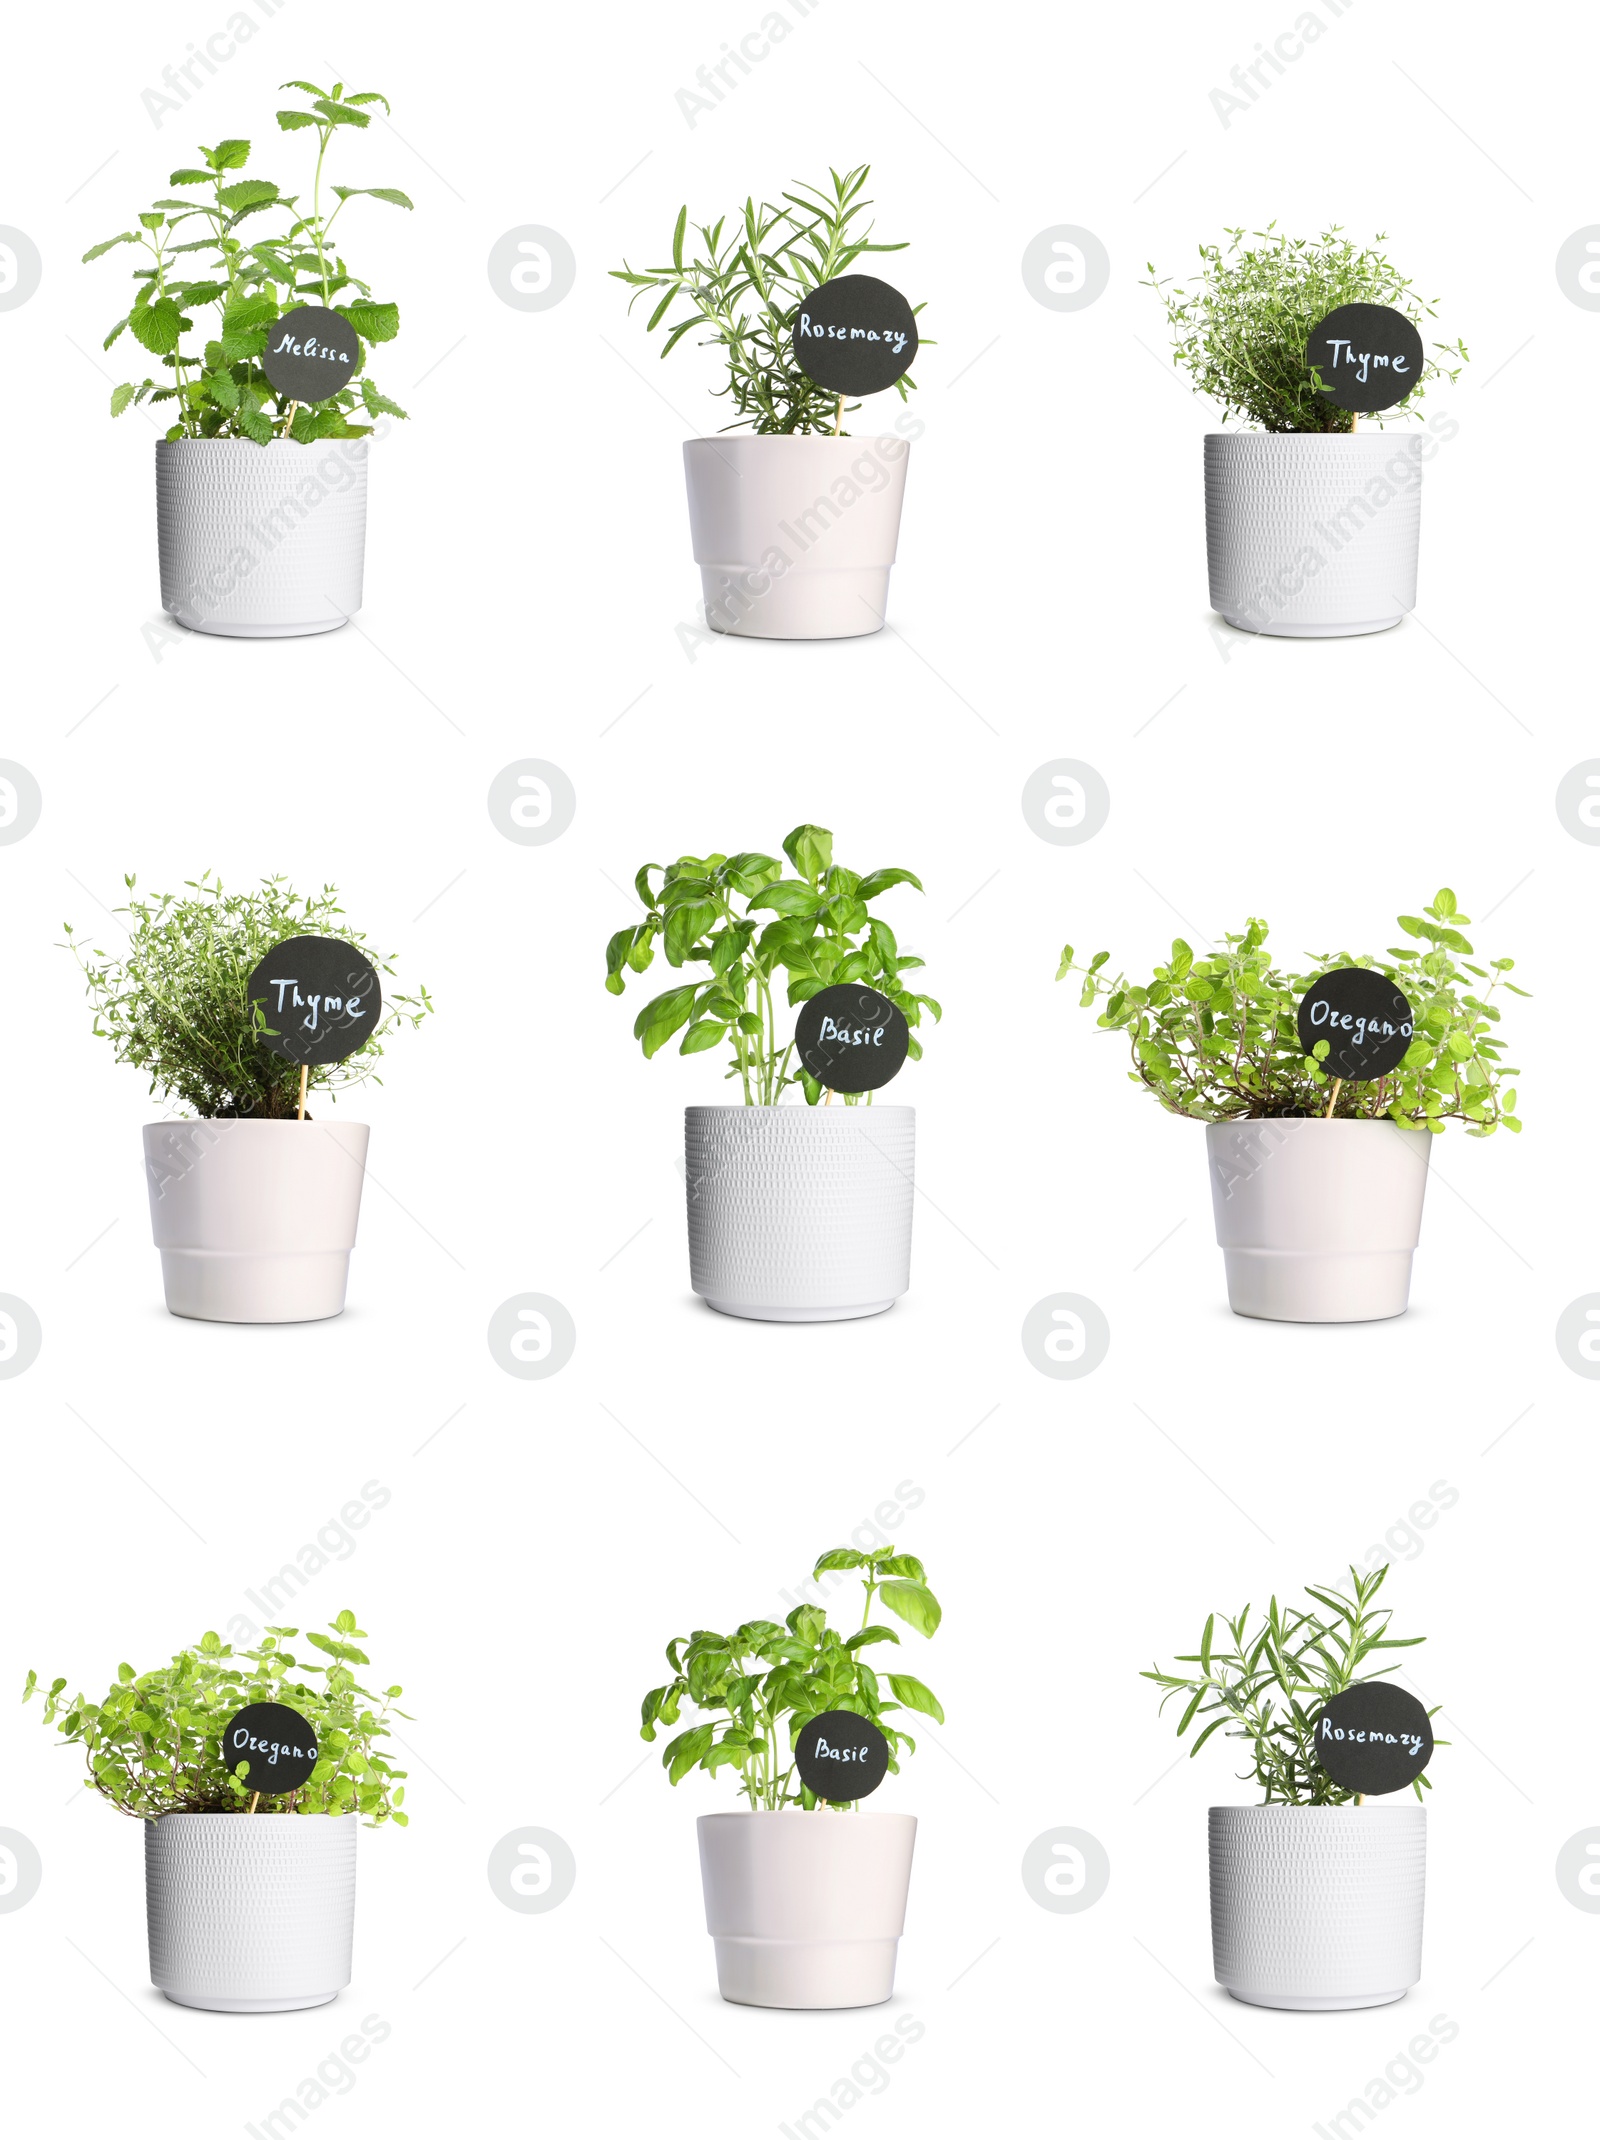 Image of Collage with different herbs growing in pots isolated on white. Thyme, oregano, melissa, basil and rosemary